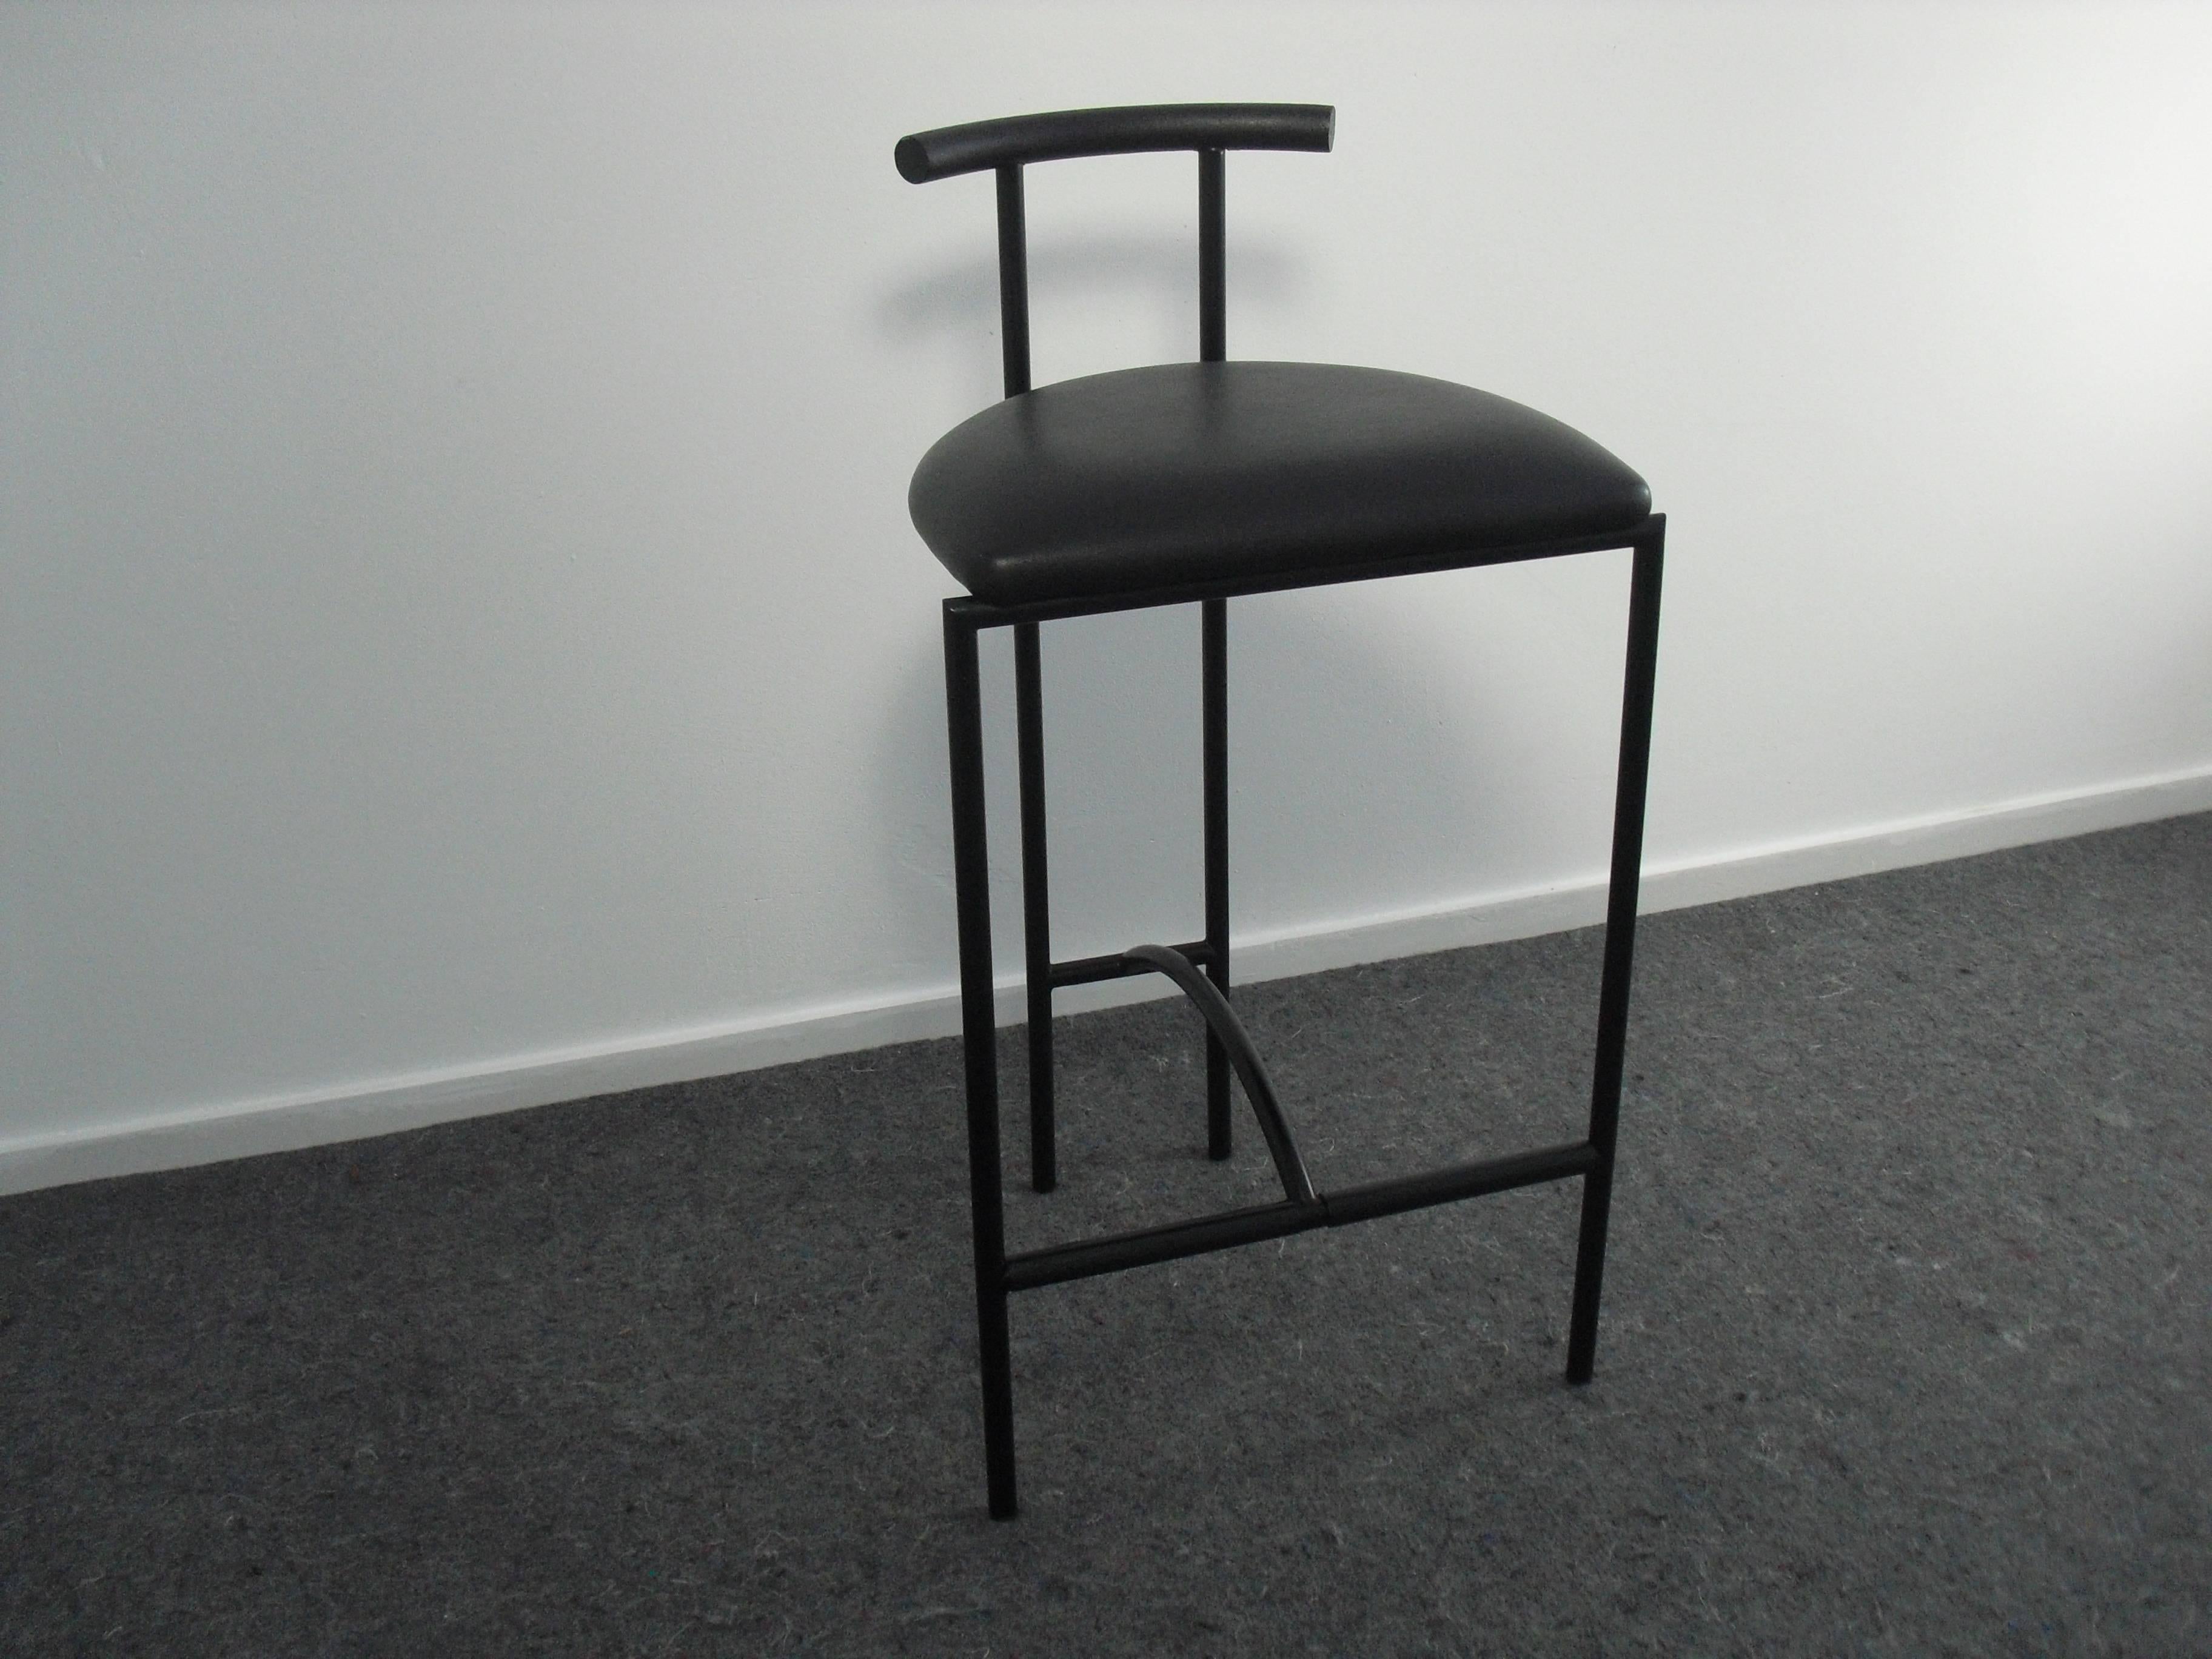 This Memphis style bar stool is designed by Rodney Kinsman (UK) for Bieffeplast Italy in 1985.
Black tubular powder coated frame with black vinyl upholstery and rubber backrest.
Very simple but stunning design!

Dimensions: H 81 cm x W43 cm x D 38